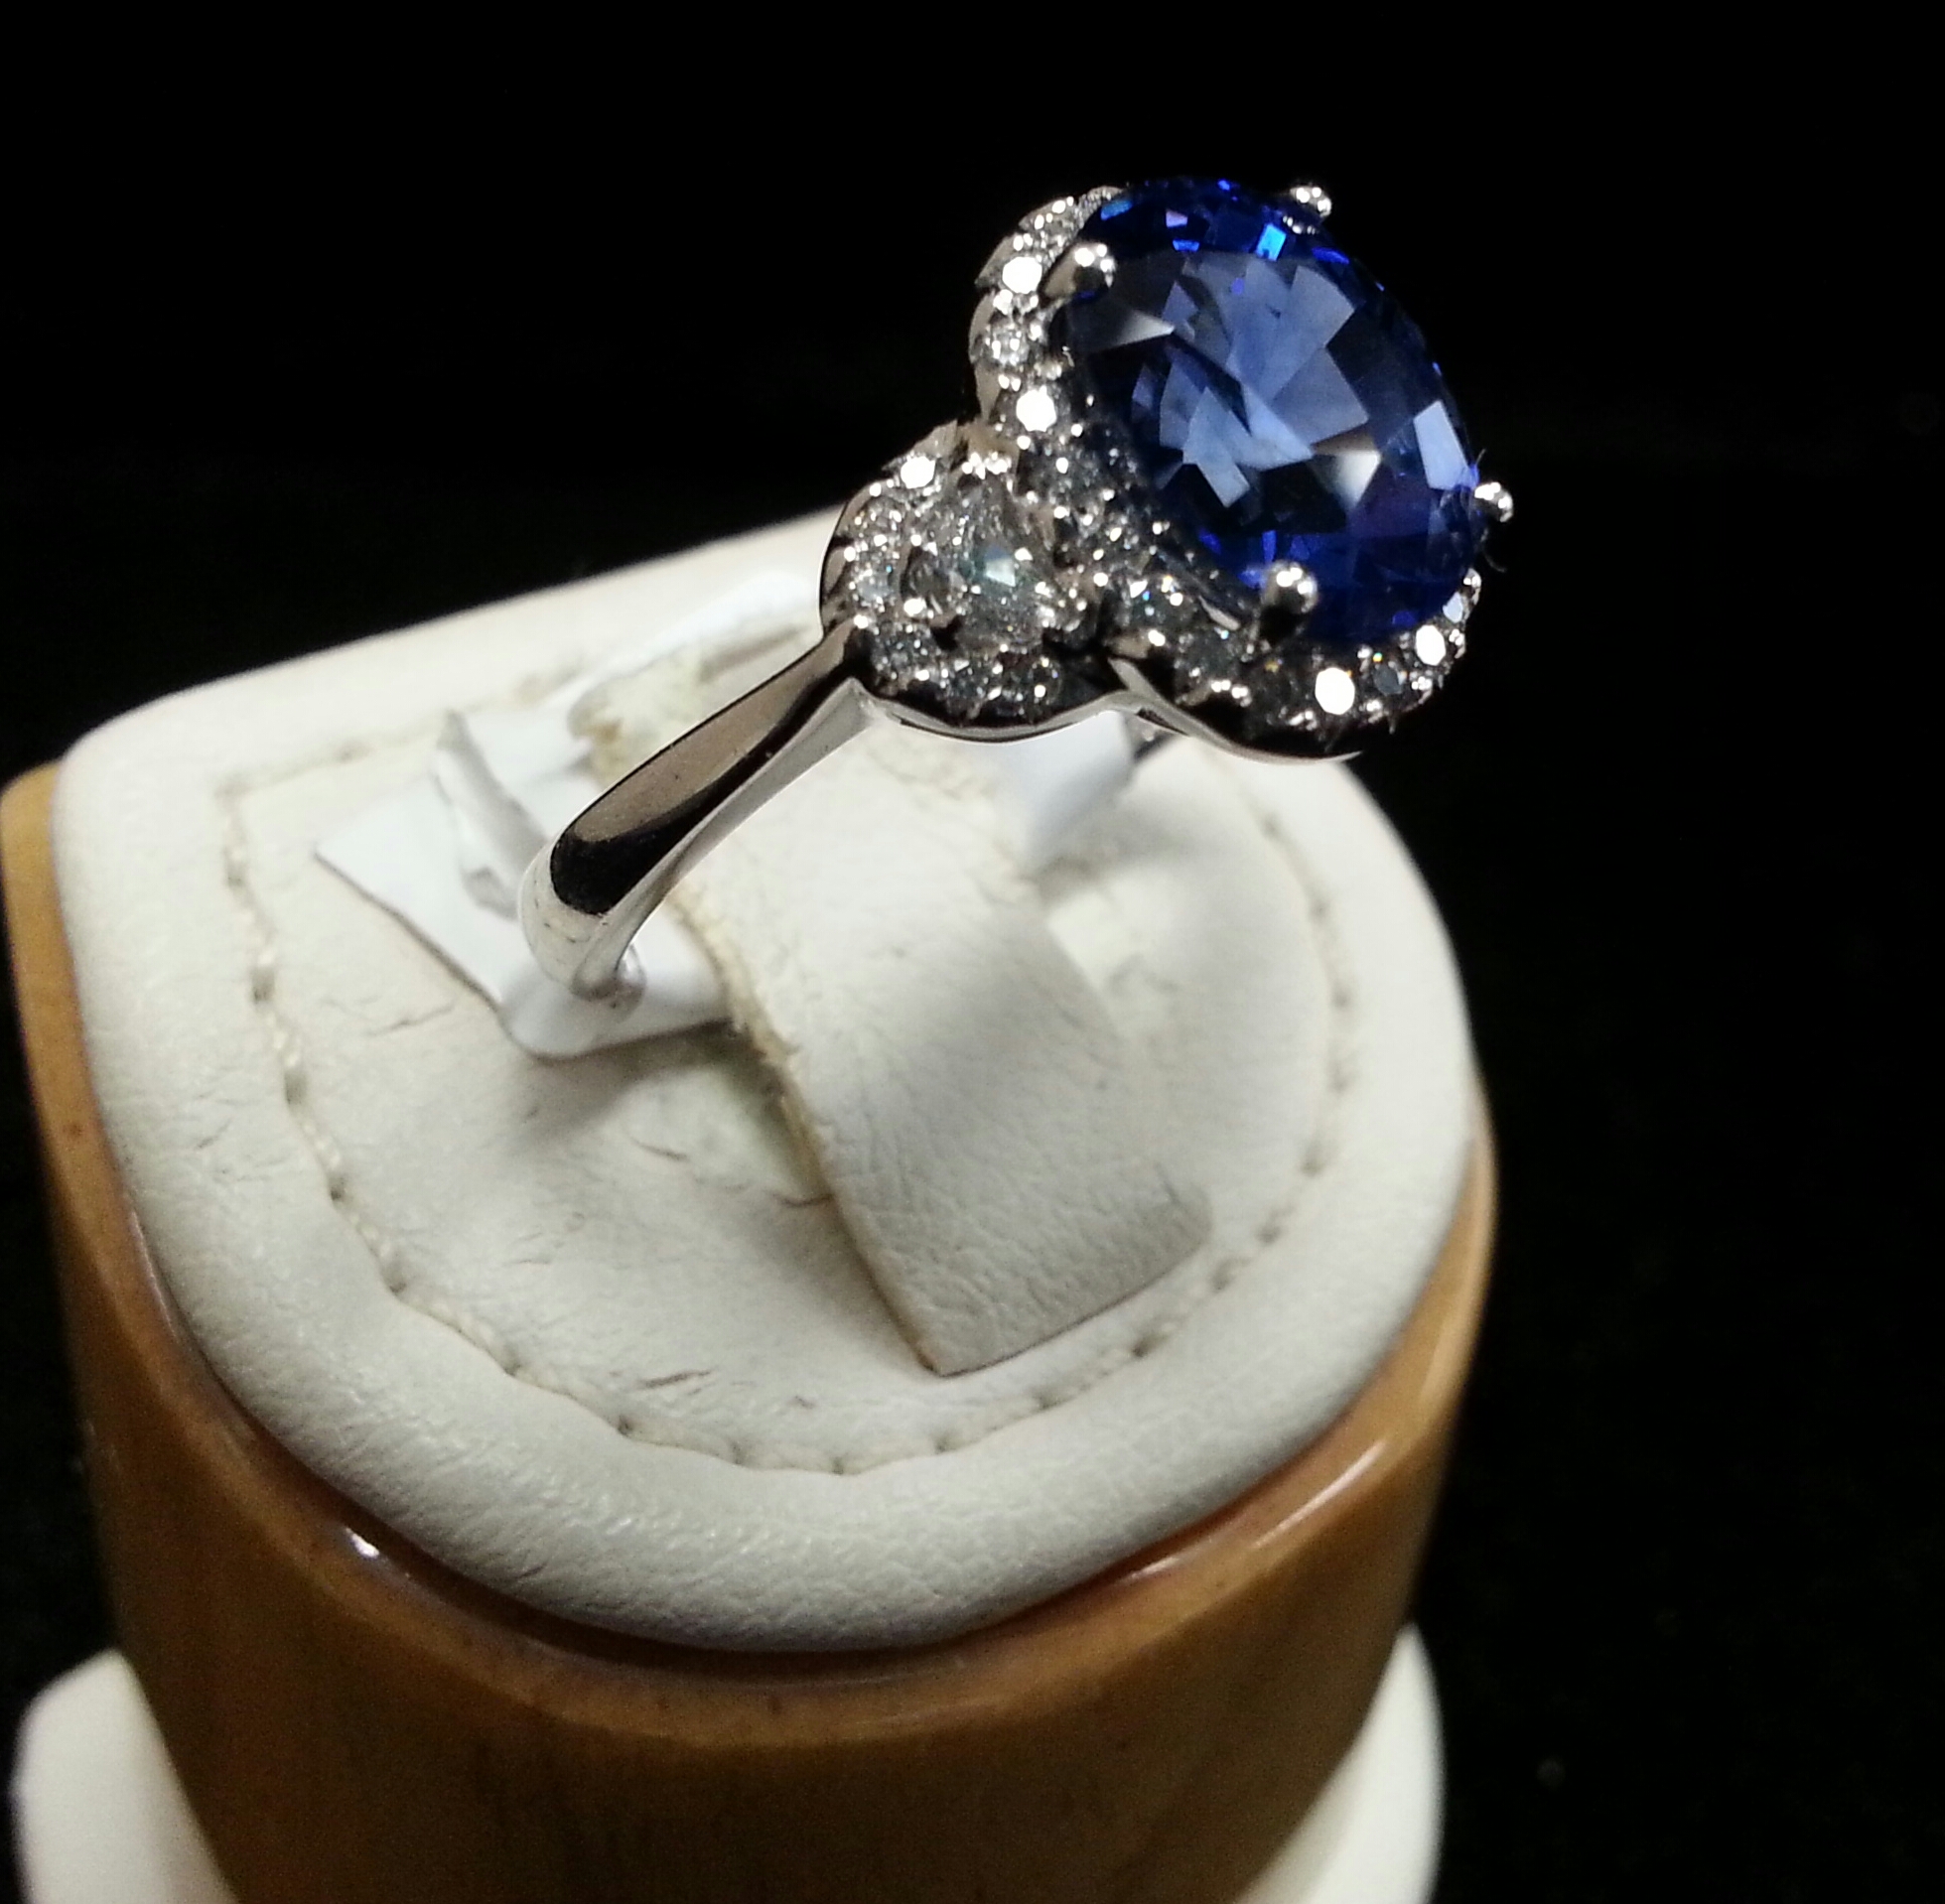 Oval Blue Sapphire and Half Moon Diamond Ring with Micro Pave Set in 18k White Gold. Sapphire is 3.67ct and Diamonds are 0.39ctw